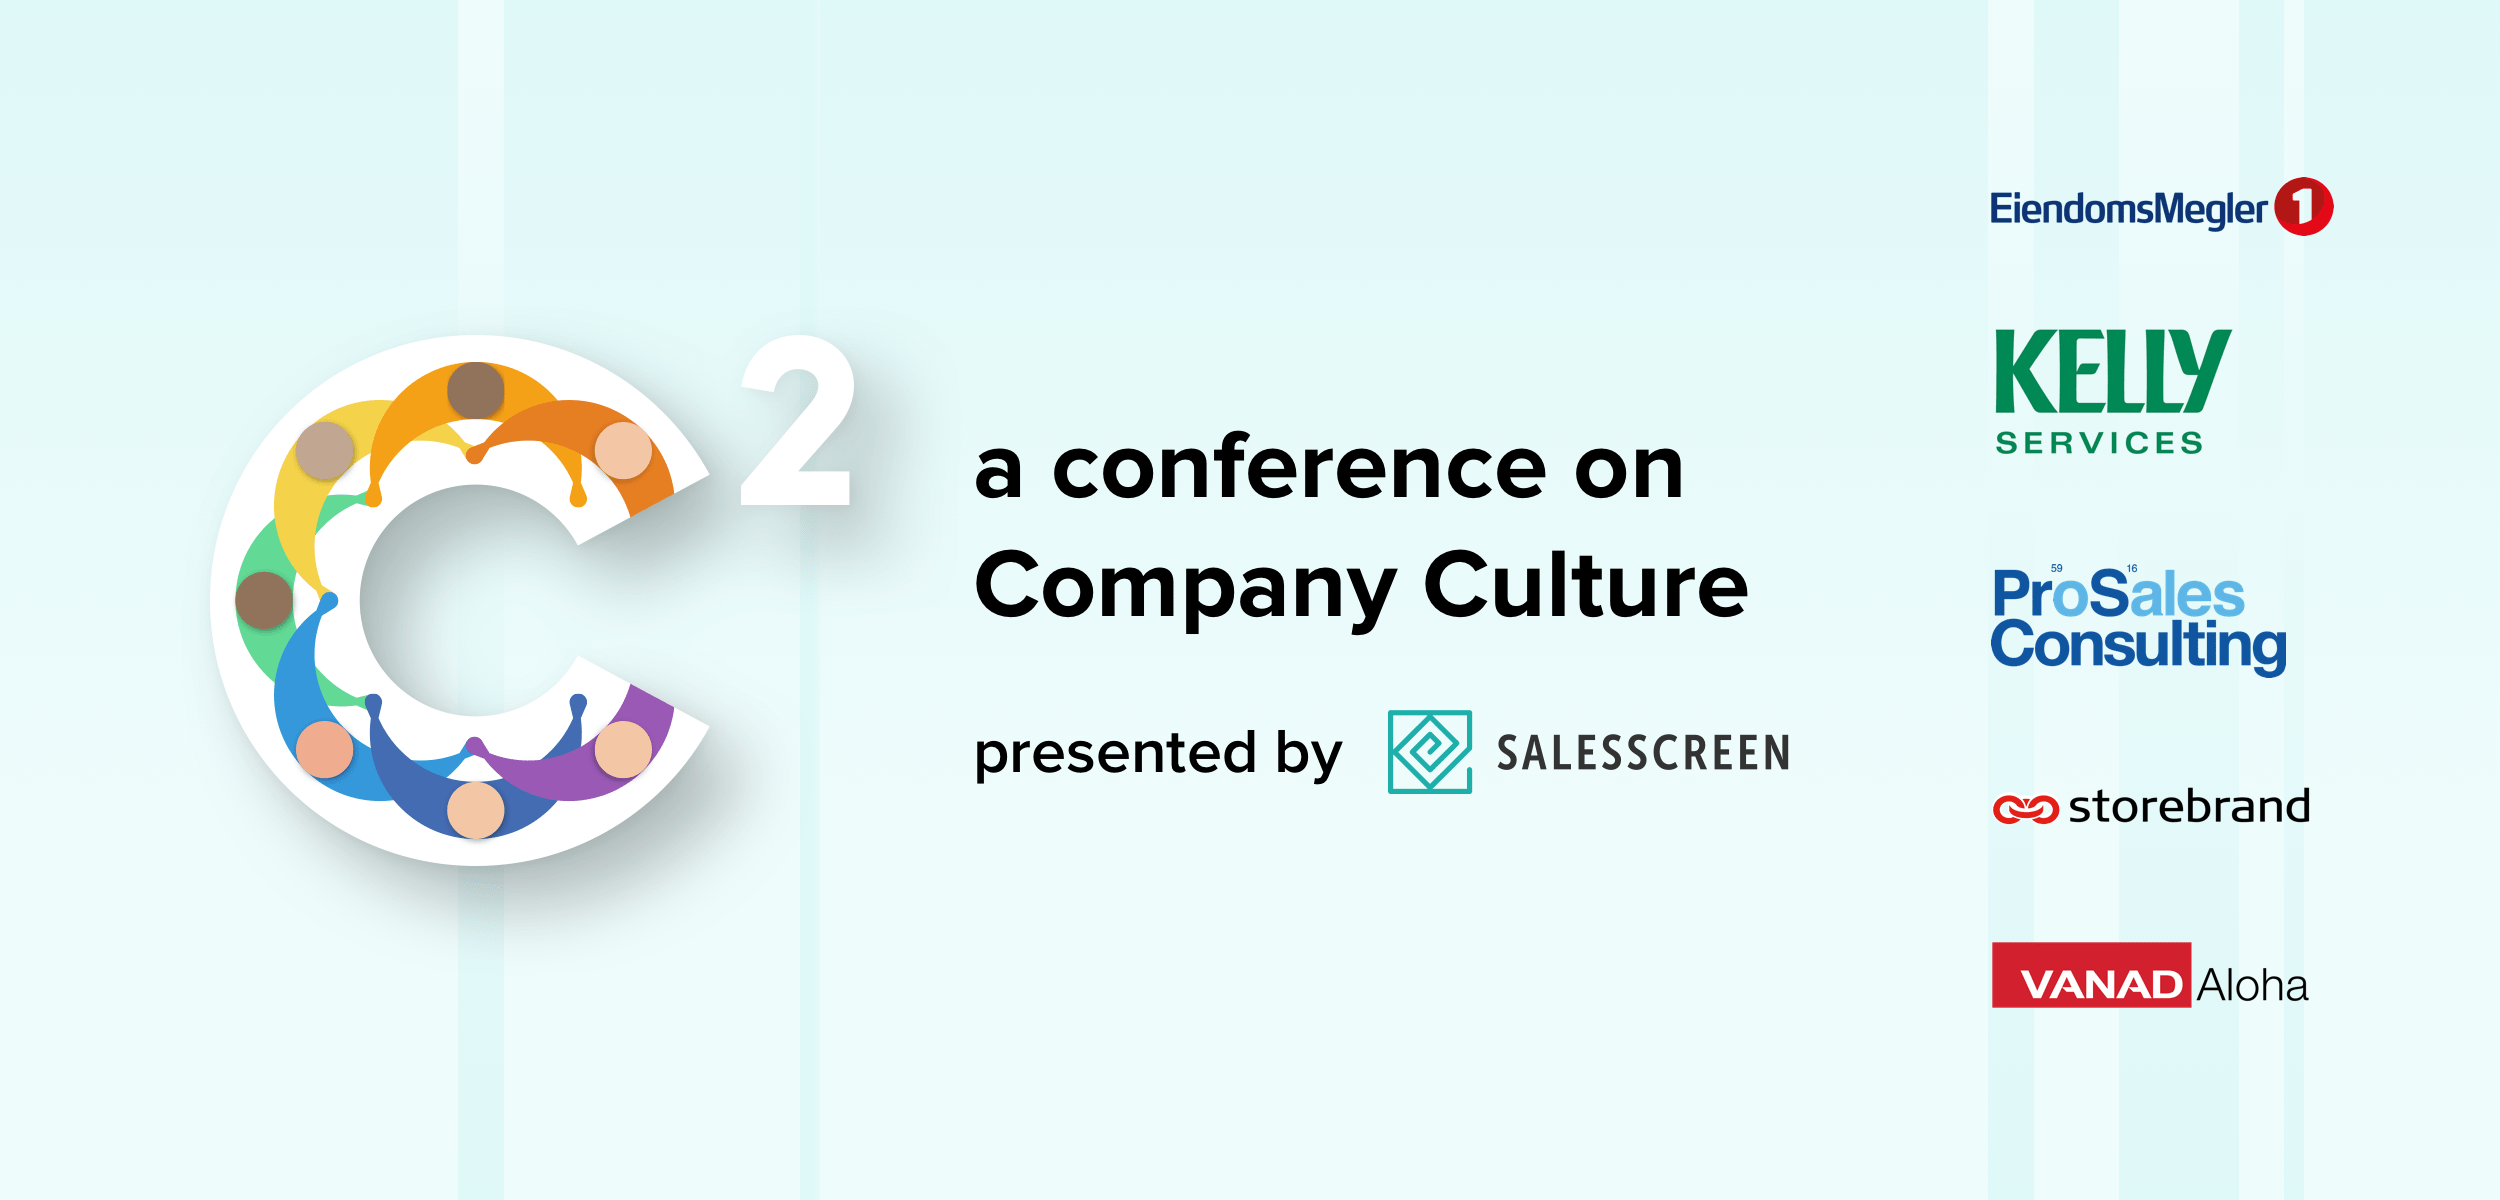 C²: A Conference on Company Culture, presented by SalesScreen